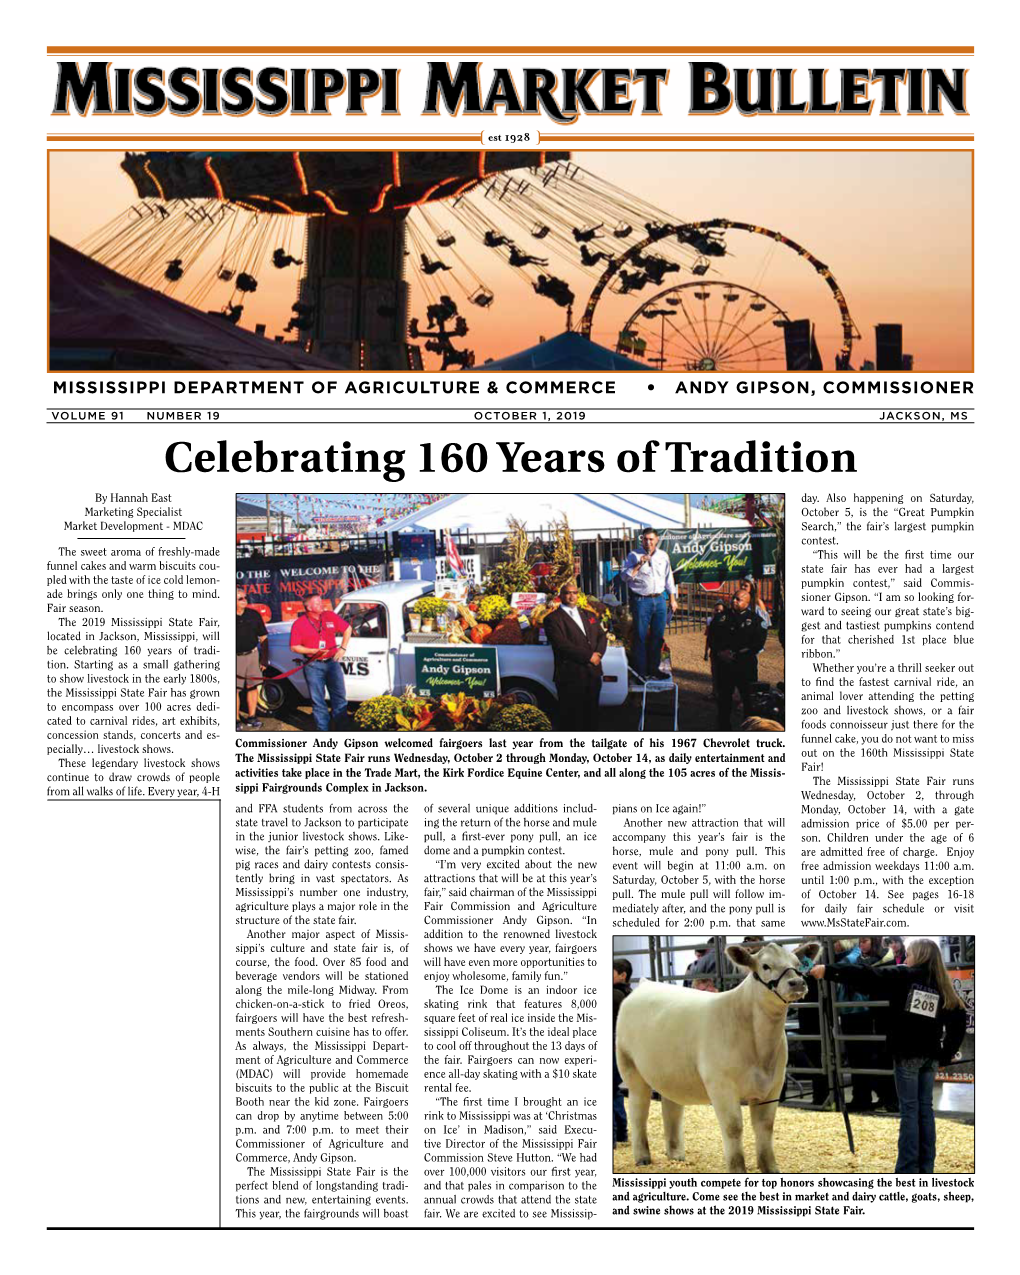 Celebrating 160 Years of Tradition by Hannah East Day